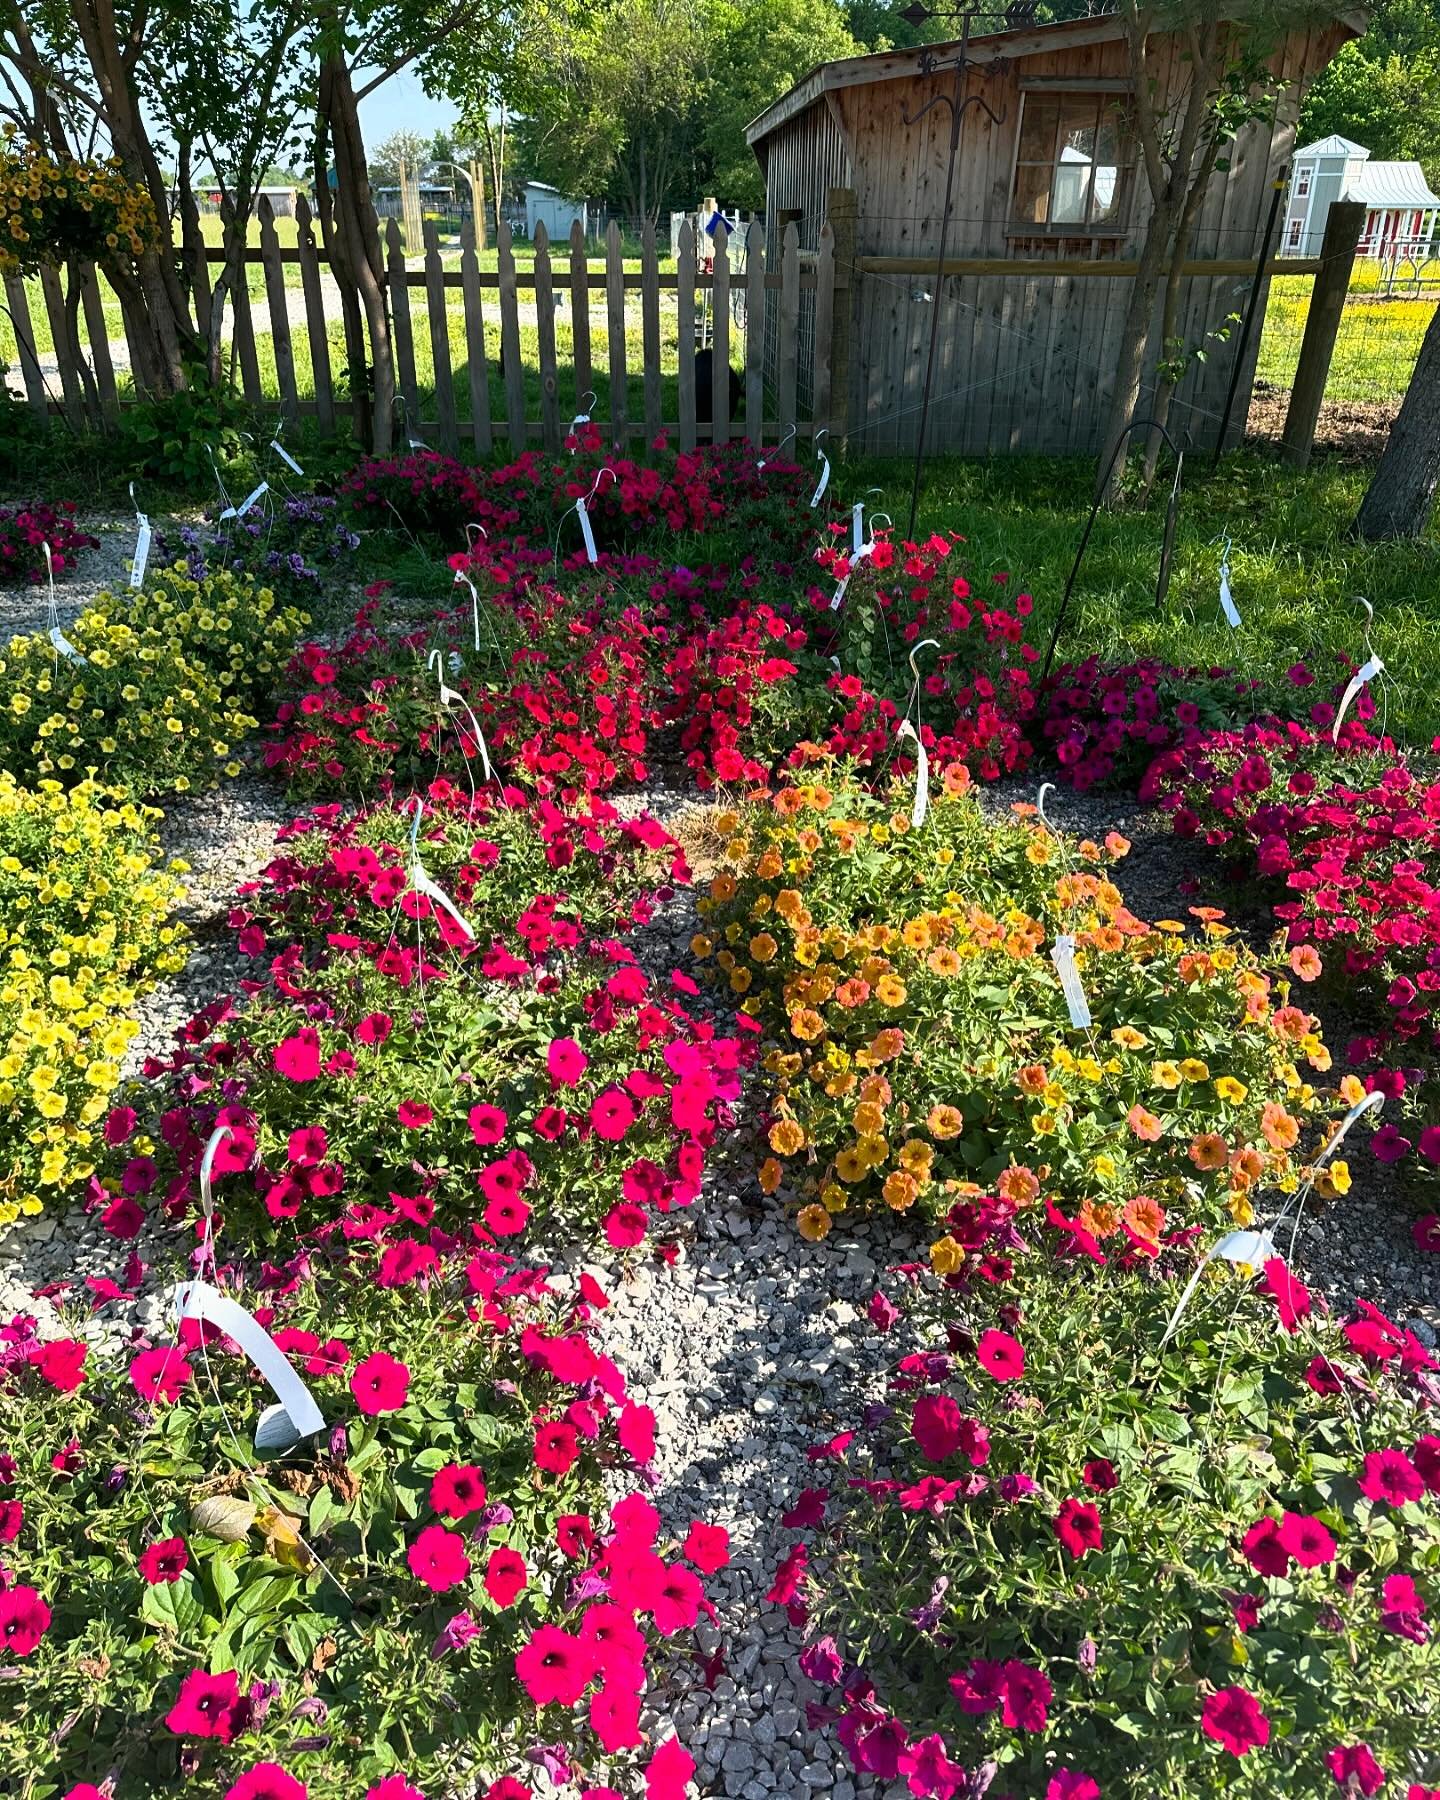 We still have large, beautiful hanging baskets for sale. Baskets are $25 each or two for $40. Stop by today during our open hours, 11am-2:30pm to get your plants! All proceeds benefit the animals at the sanctuary ❤️❤️